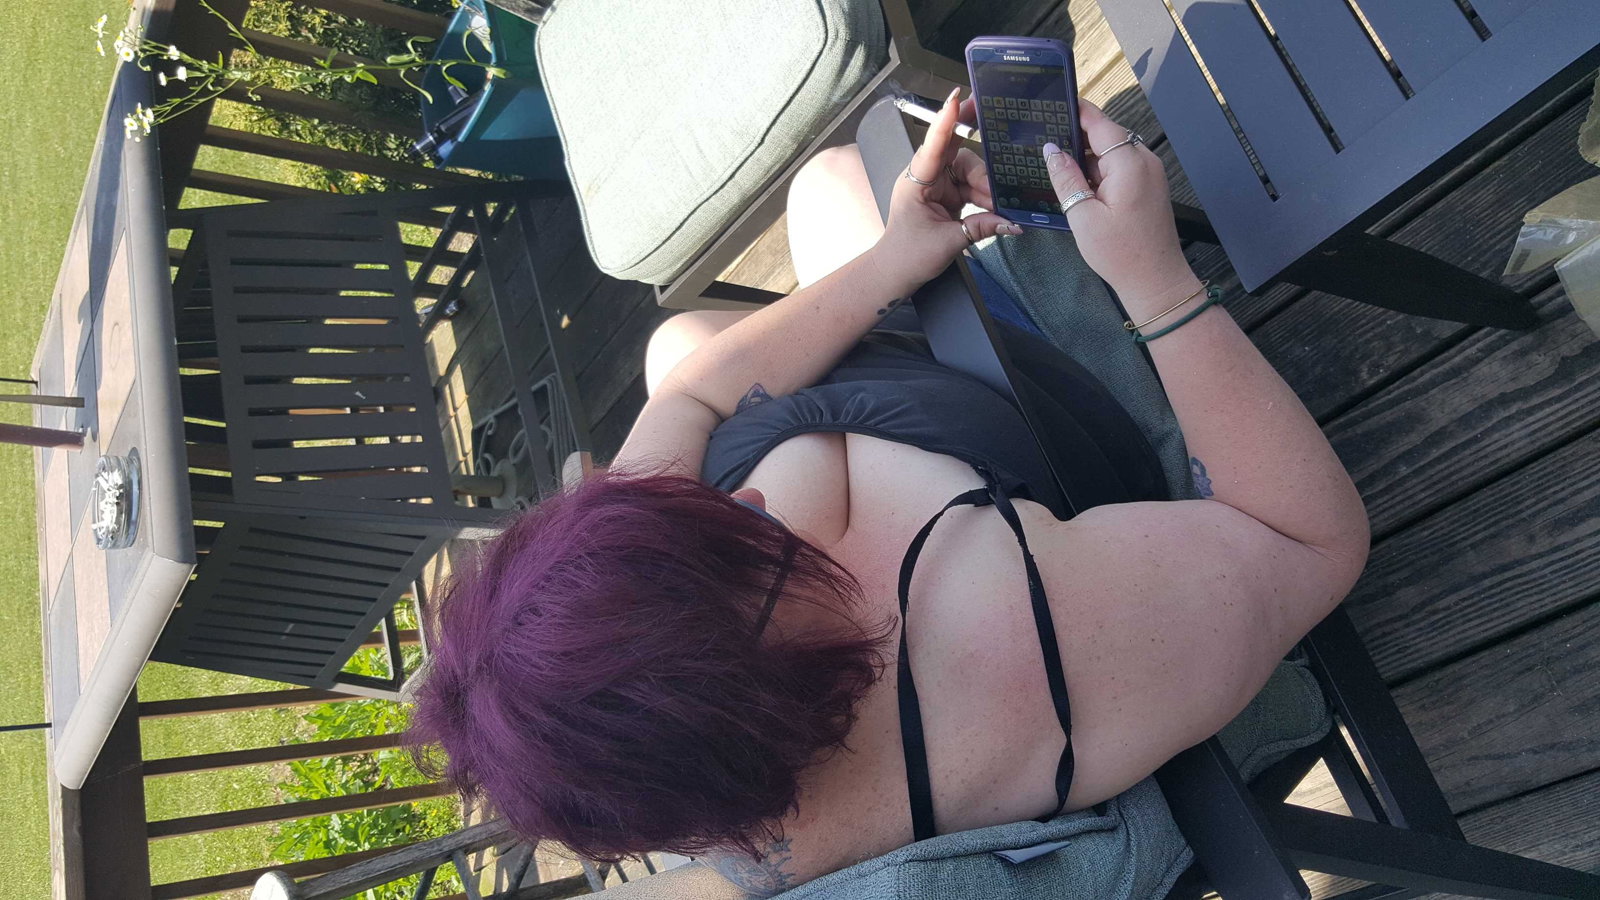 Photo by Dawn42D with the username @Dawn42D,  July 28, 2017 at 4:16 AM and the text says 'Sexy goddess showing her amazing cleavage while smoking. Happy Friday! #smoking  #downblouse  #cleavage  #unaware  #wife  #big  #naturals  #big  #beautiful  #woman  #bbw  #bbw  #wife  #sexy  #wife  #smoking  #wife  #smoking  #bbw  #wvhotbbw  #wvhb  #sexy ..'